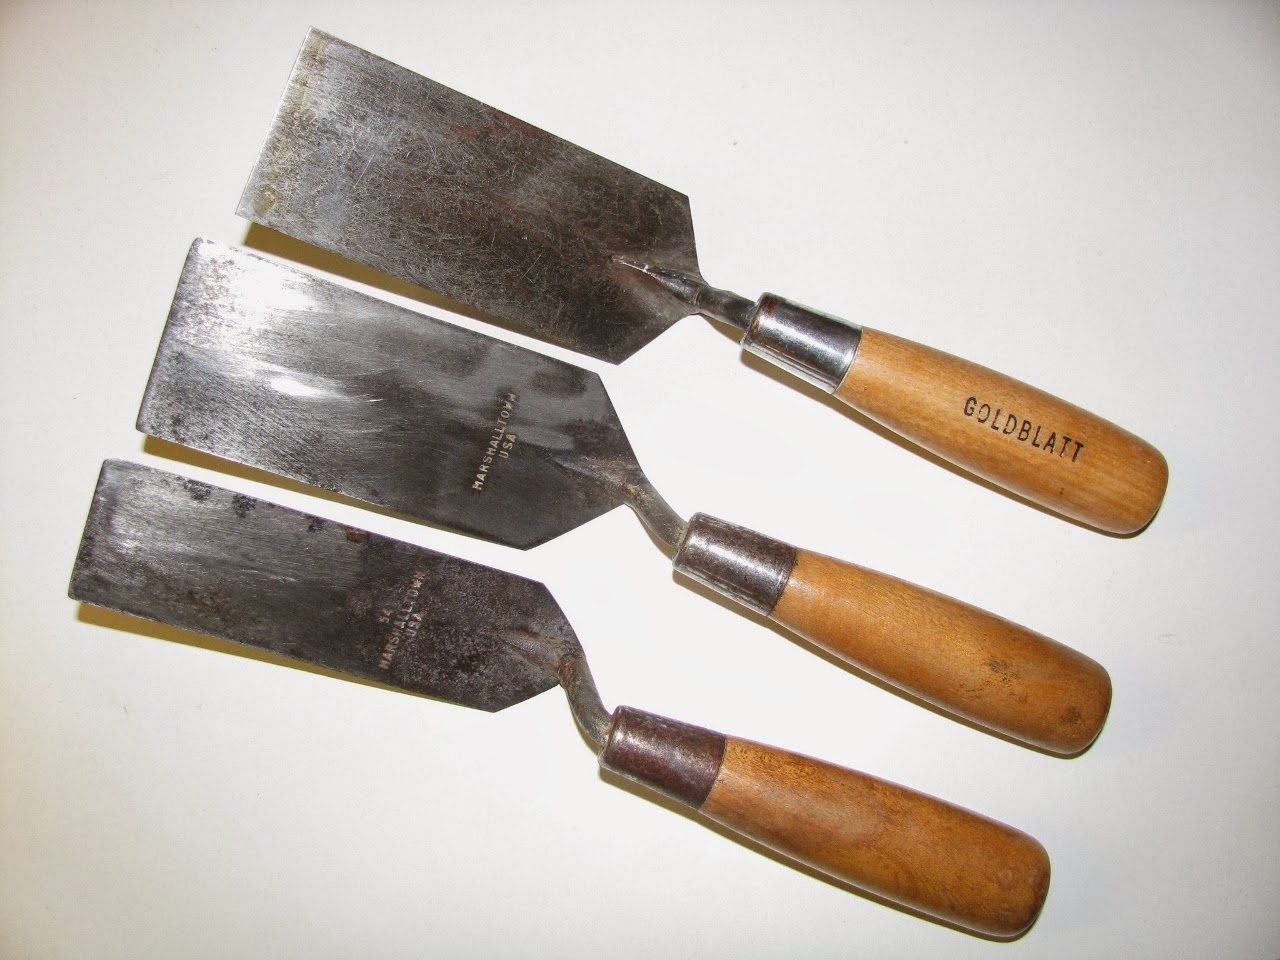 Trowel and Masonry Tool Collector Resource : Margin Trowels